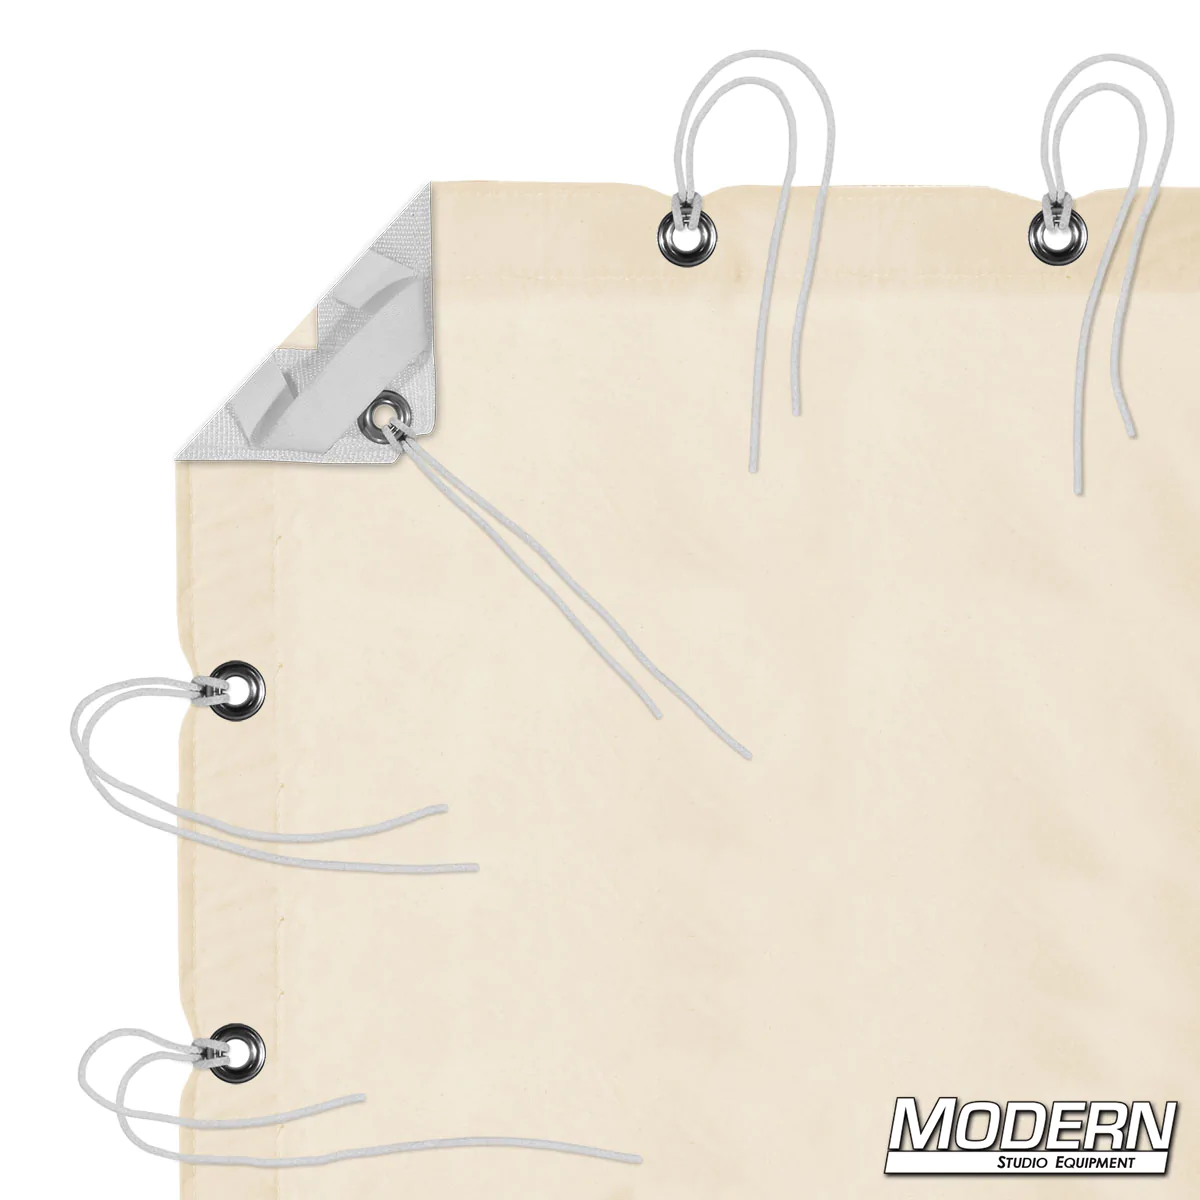 Unbleached Muslin with Bag